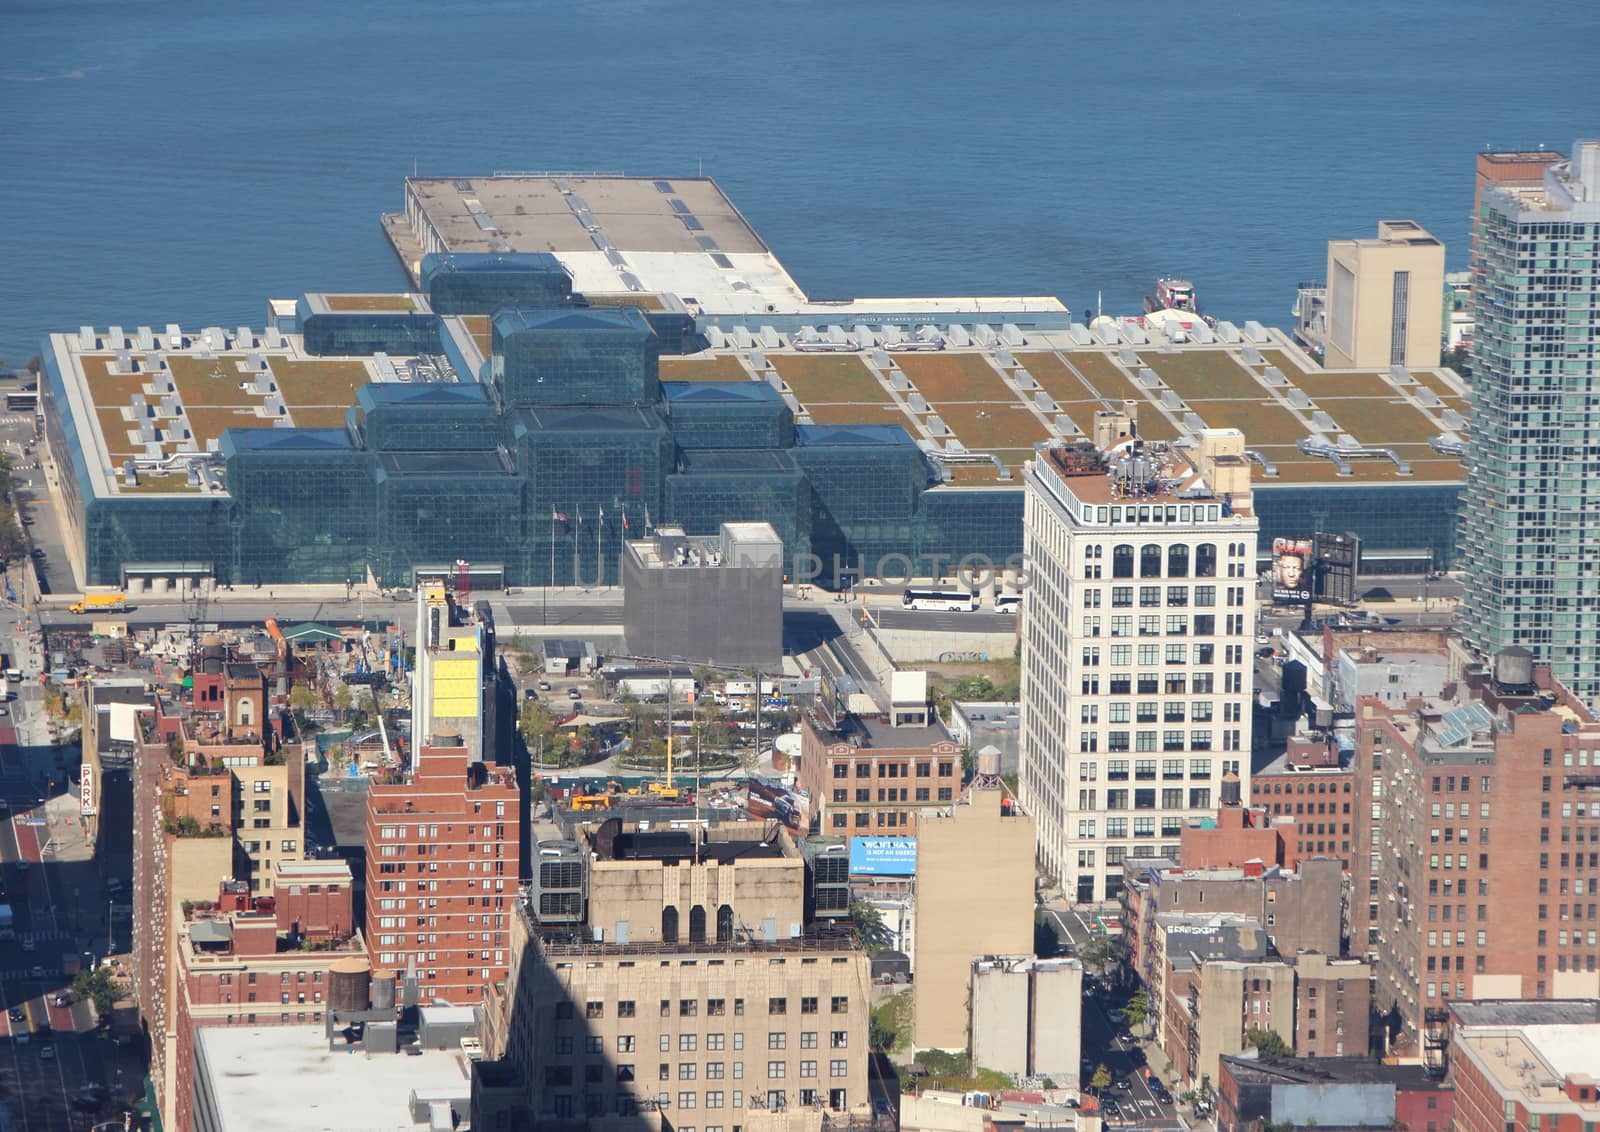 Javits Conference Center New York in Aerial Perspective with Hudson River in Background